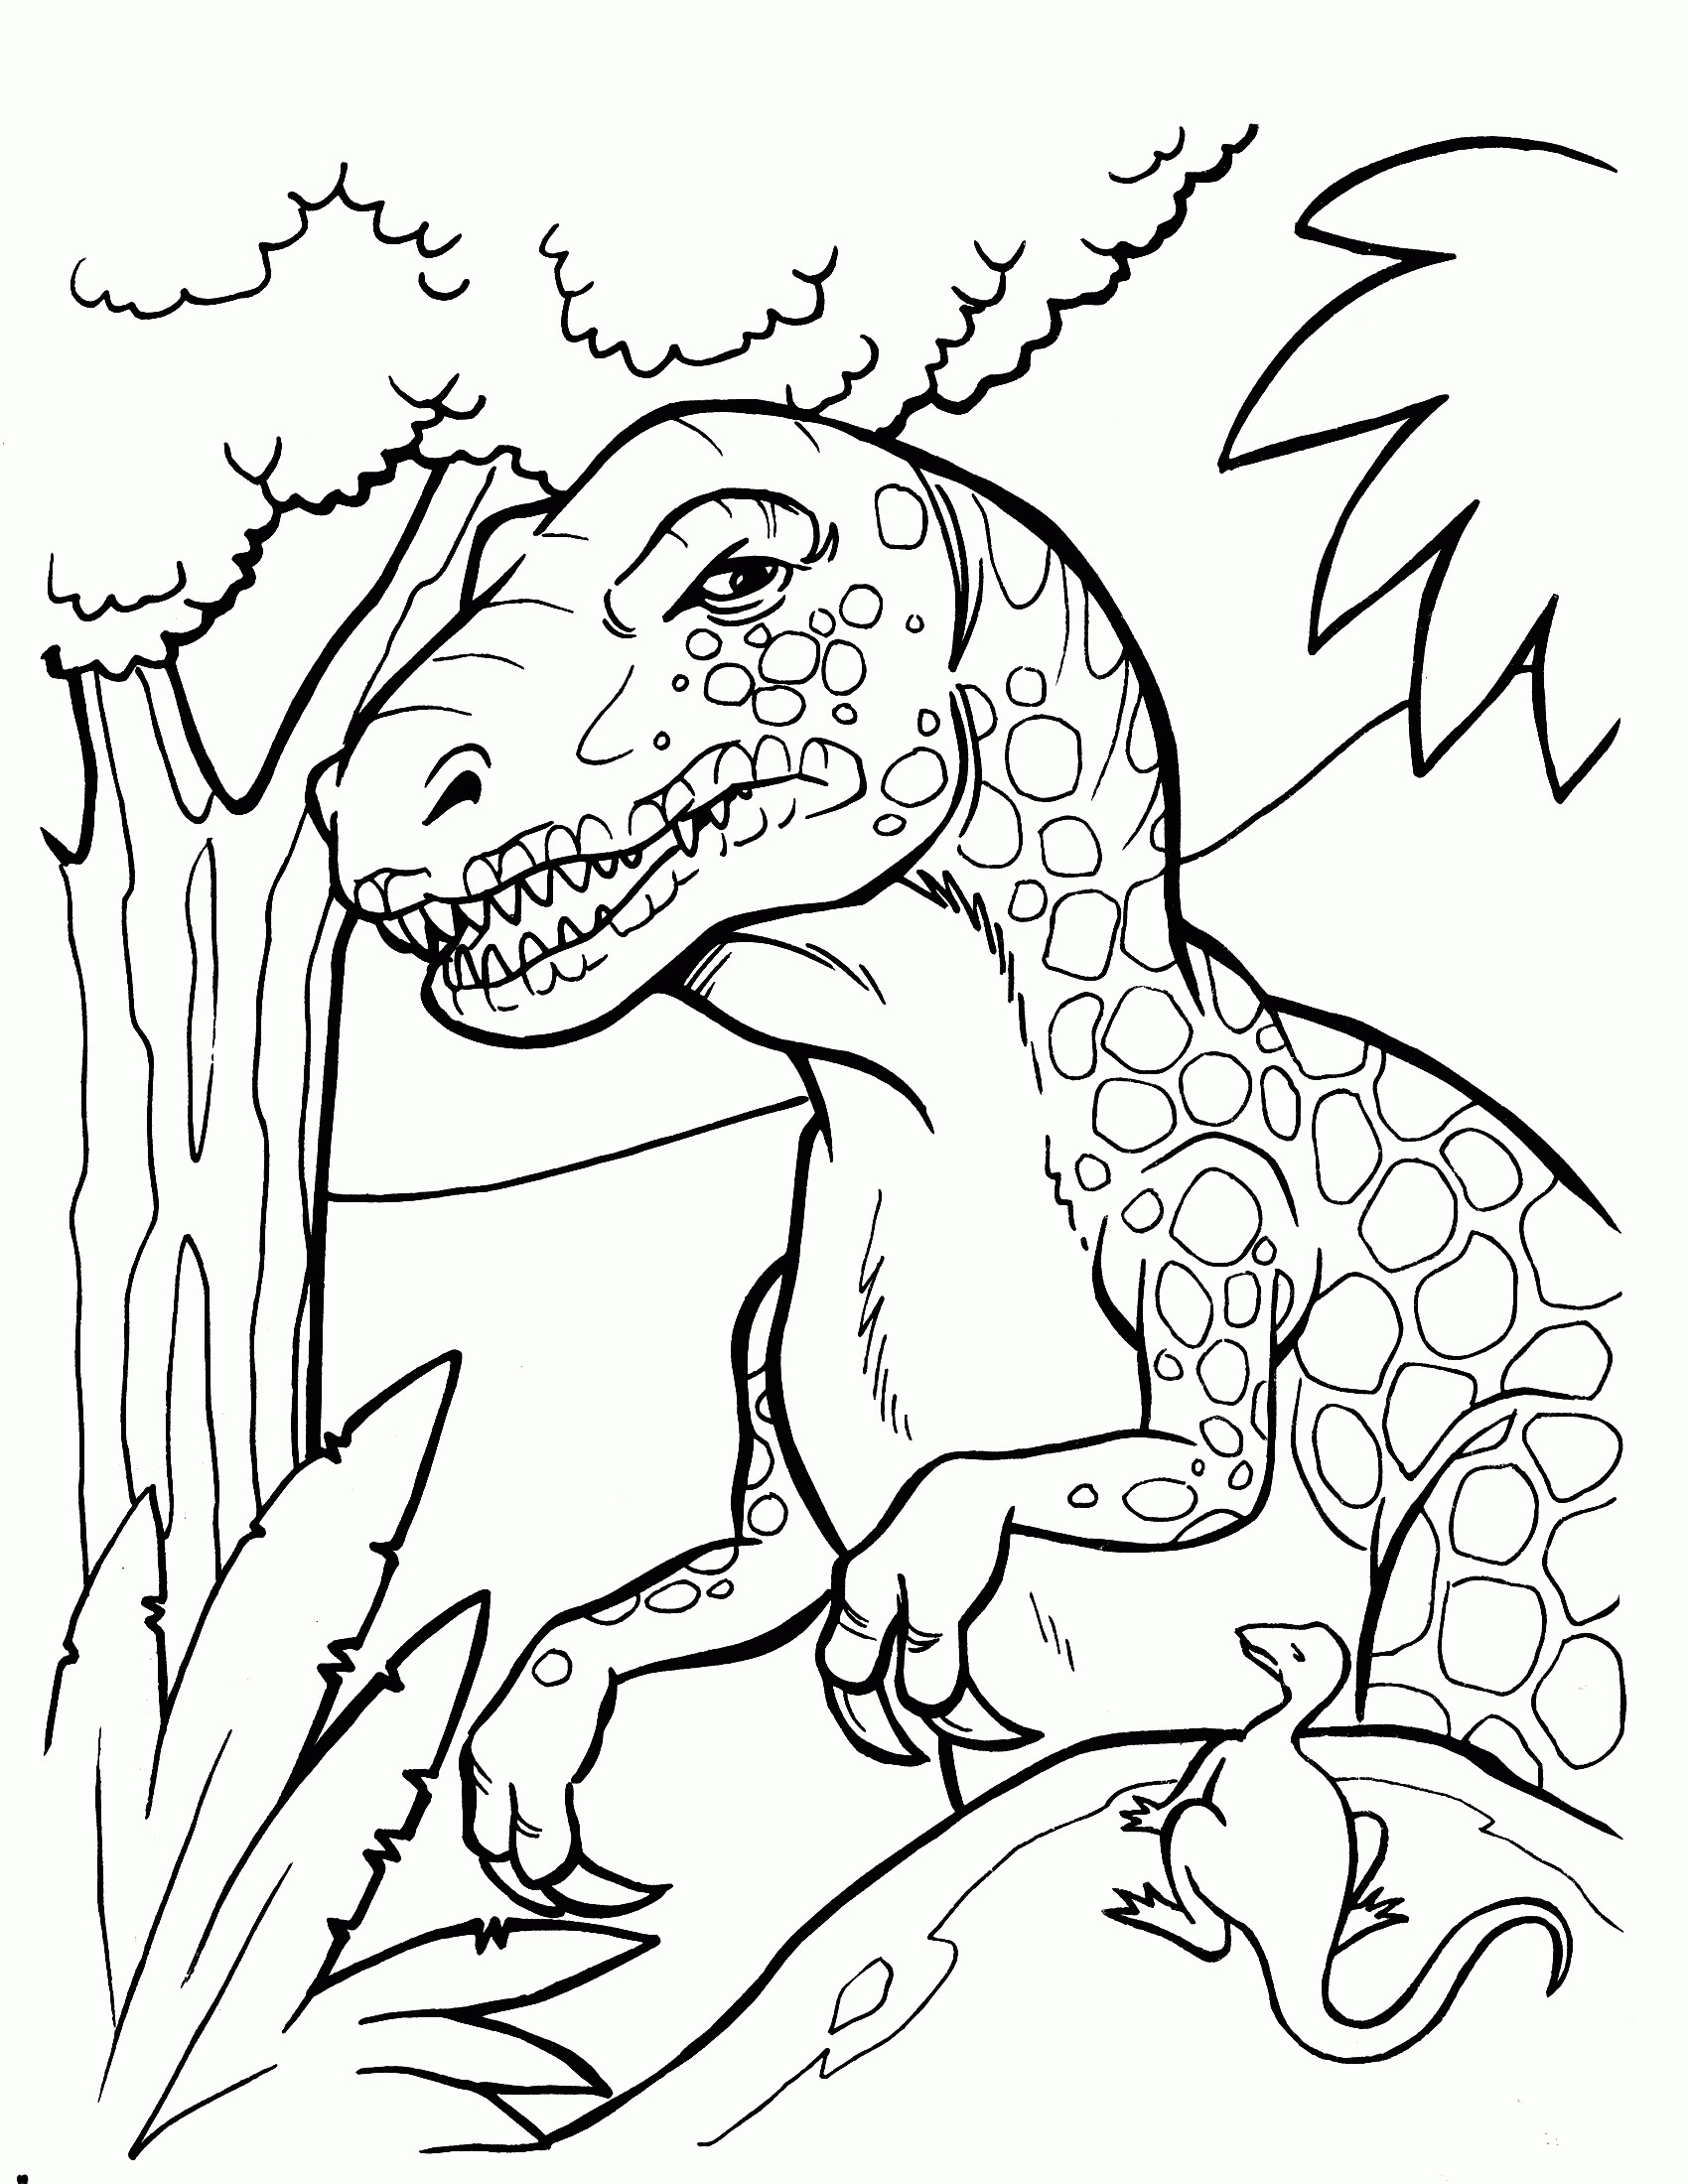 Coloring Pages For Kids Dinosaurs
 Free Dinosaur Printable Coloring Pages Coloring Home